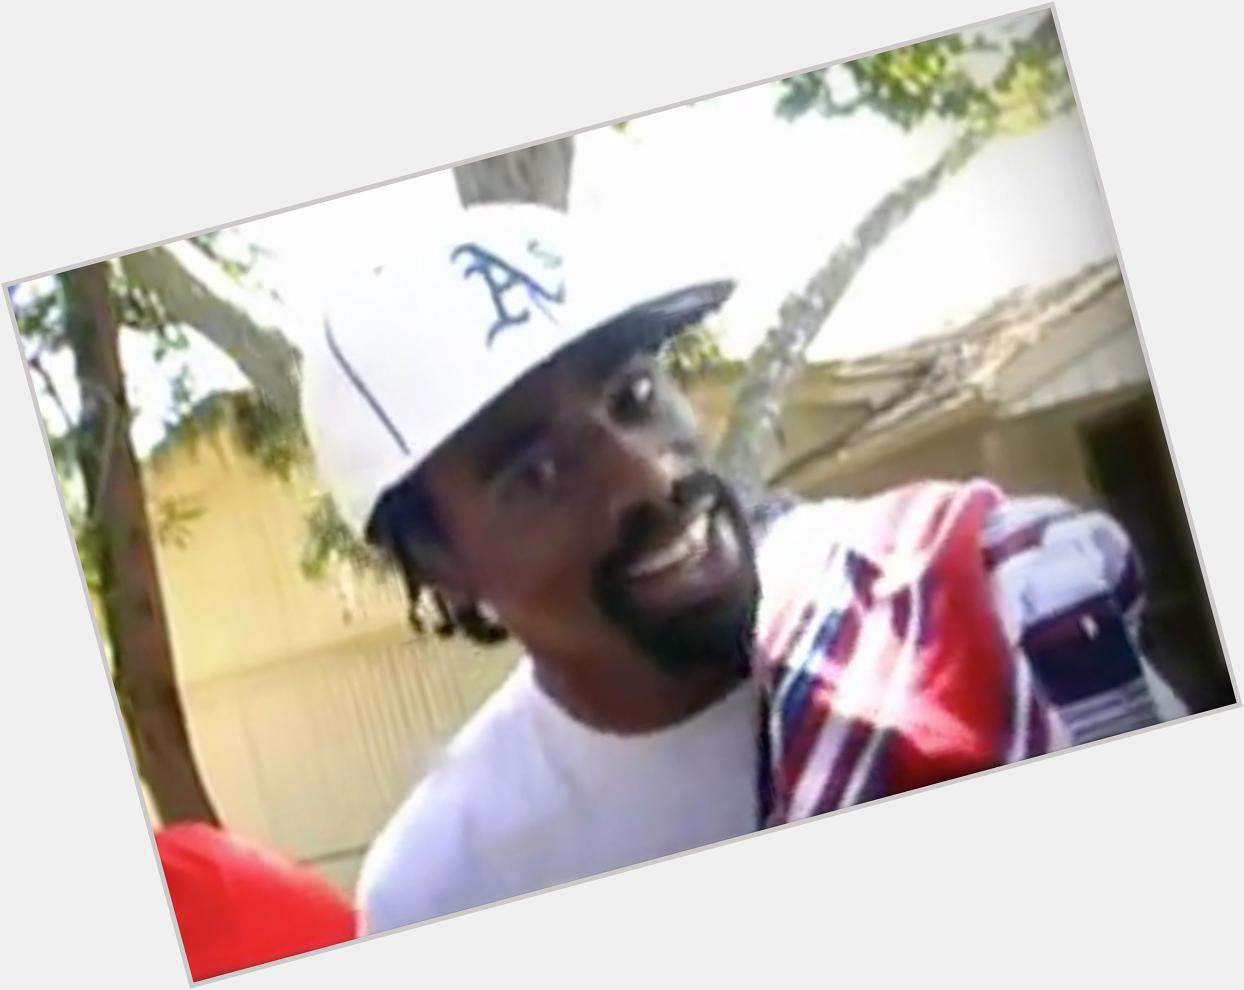 A Happy Birthday salute to Mac Dre. The late rapper would\ve been 45 years old today (R.I.P):  